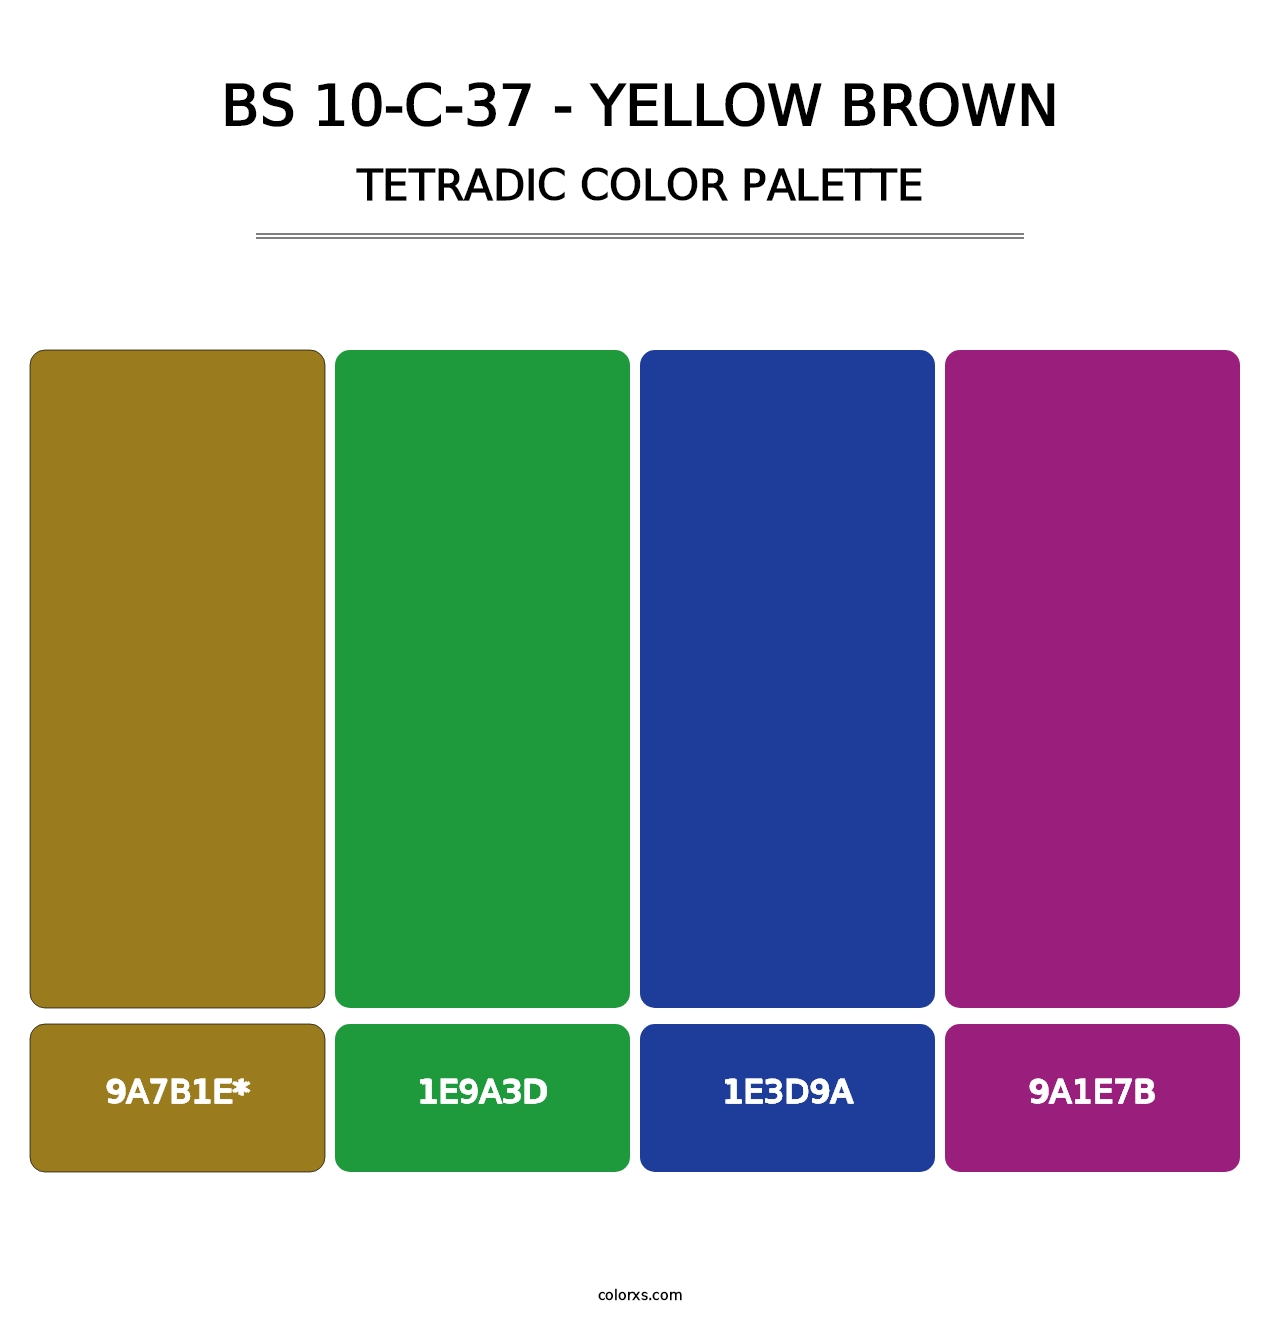 BS 10-C-37 - Yellow Brown - Tetradic Color Palette